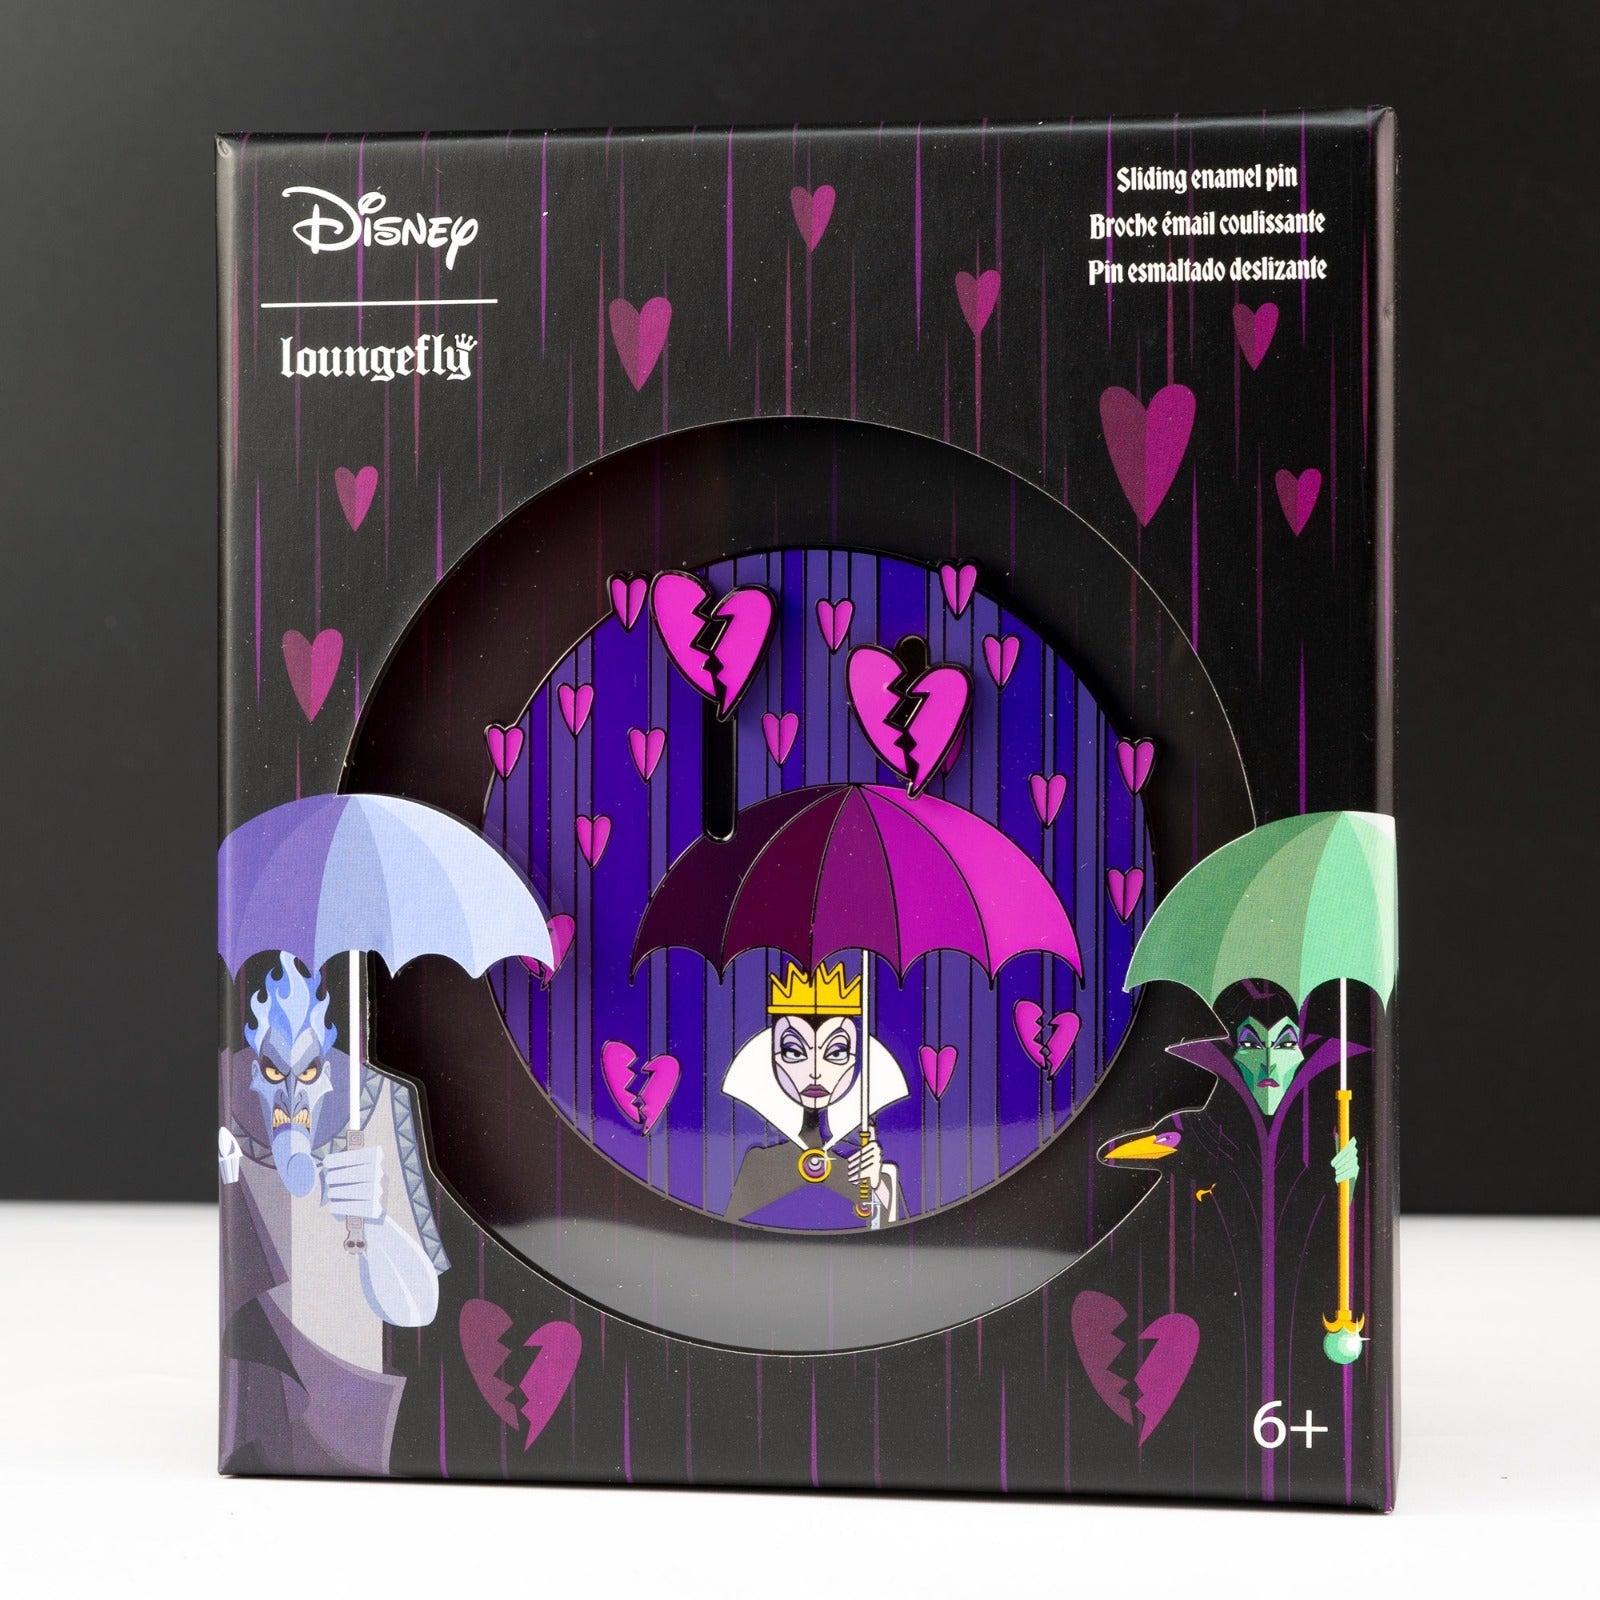 Loungefly x Disney Villains Curse Your Hearts 3 Inch Sliding Pin